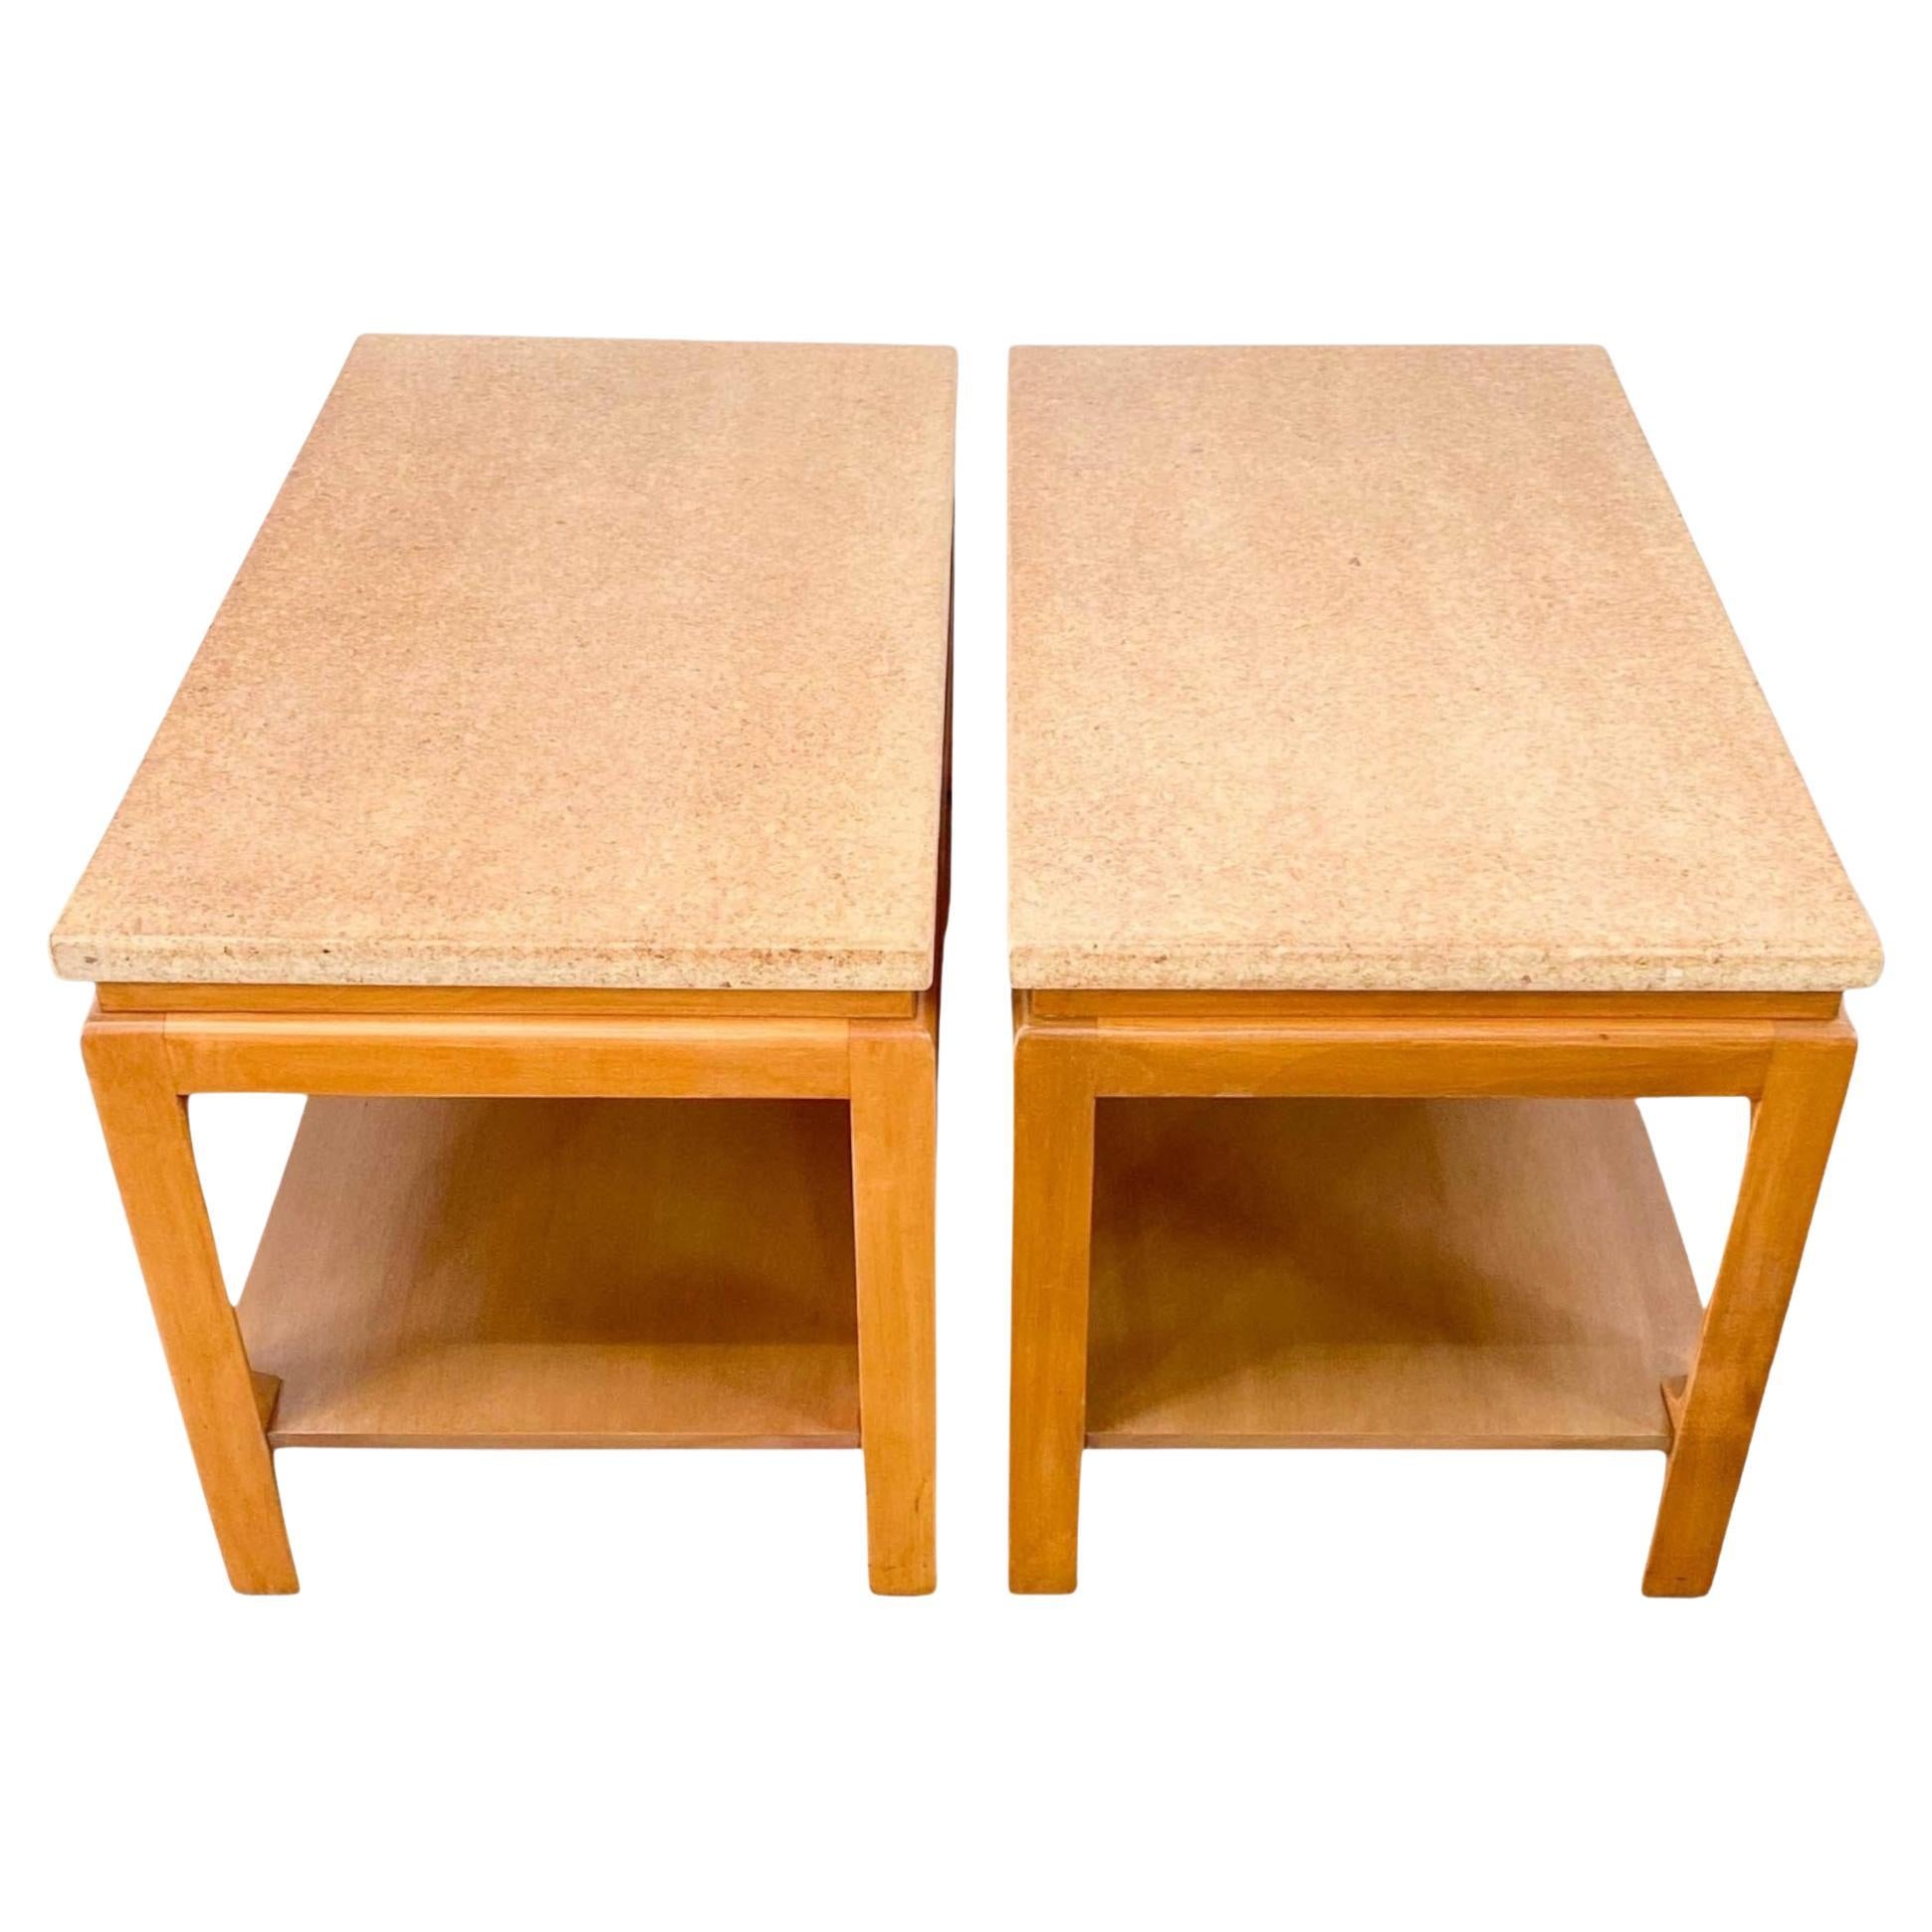 A pair of mahogany side or end tables with cork tops designed by Paul Frankl for the Johnson Furniture Company in the 1950s.
The tables are in excellent vintage condition and were recently re=lacquered.


